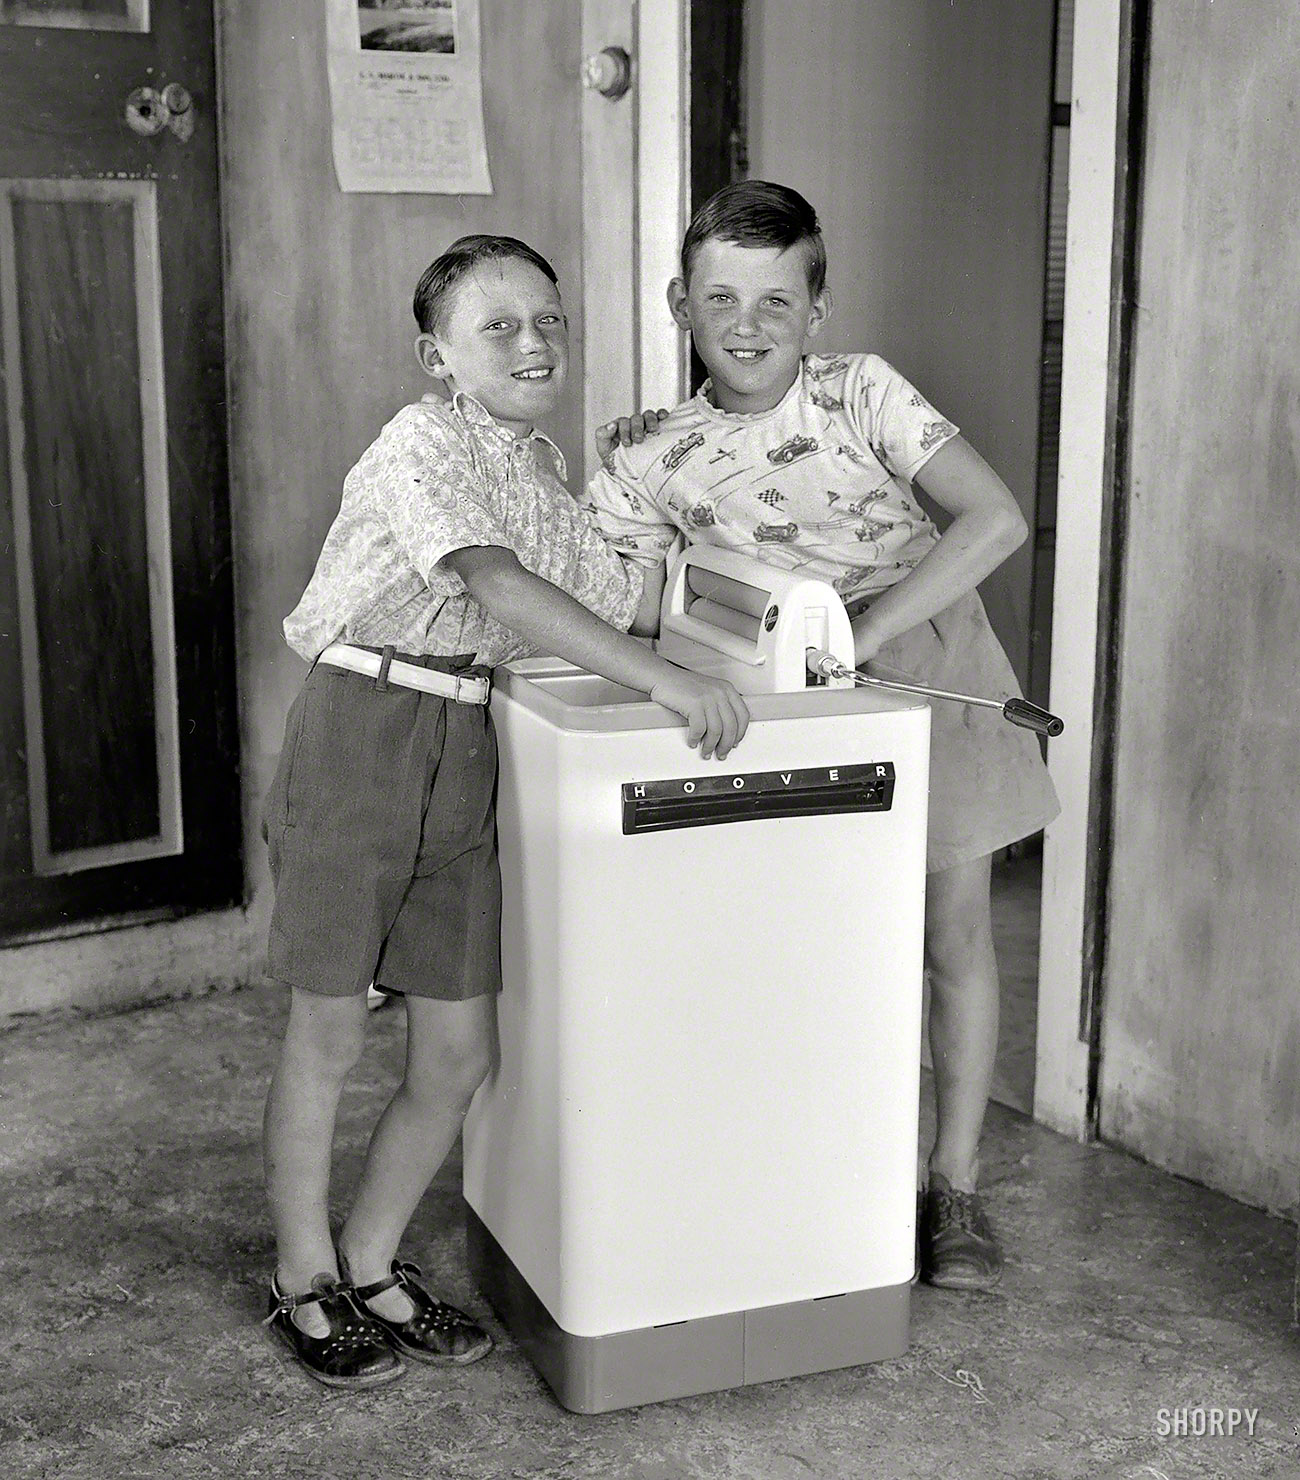 Jan. 19, 1956. Wellington, New Zealand. "Anthony and Paul Banks with a Hoover washing machine." The pint-size washer for small families. View full size.